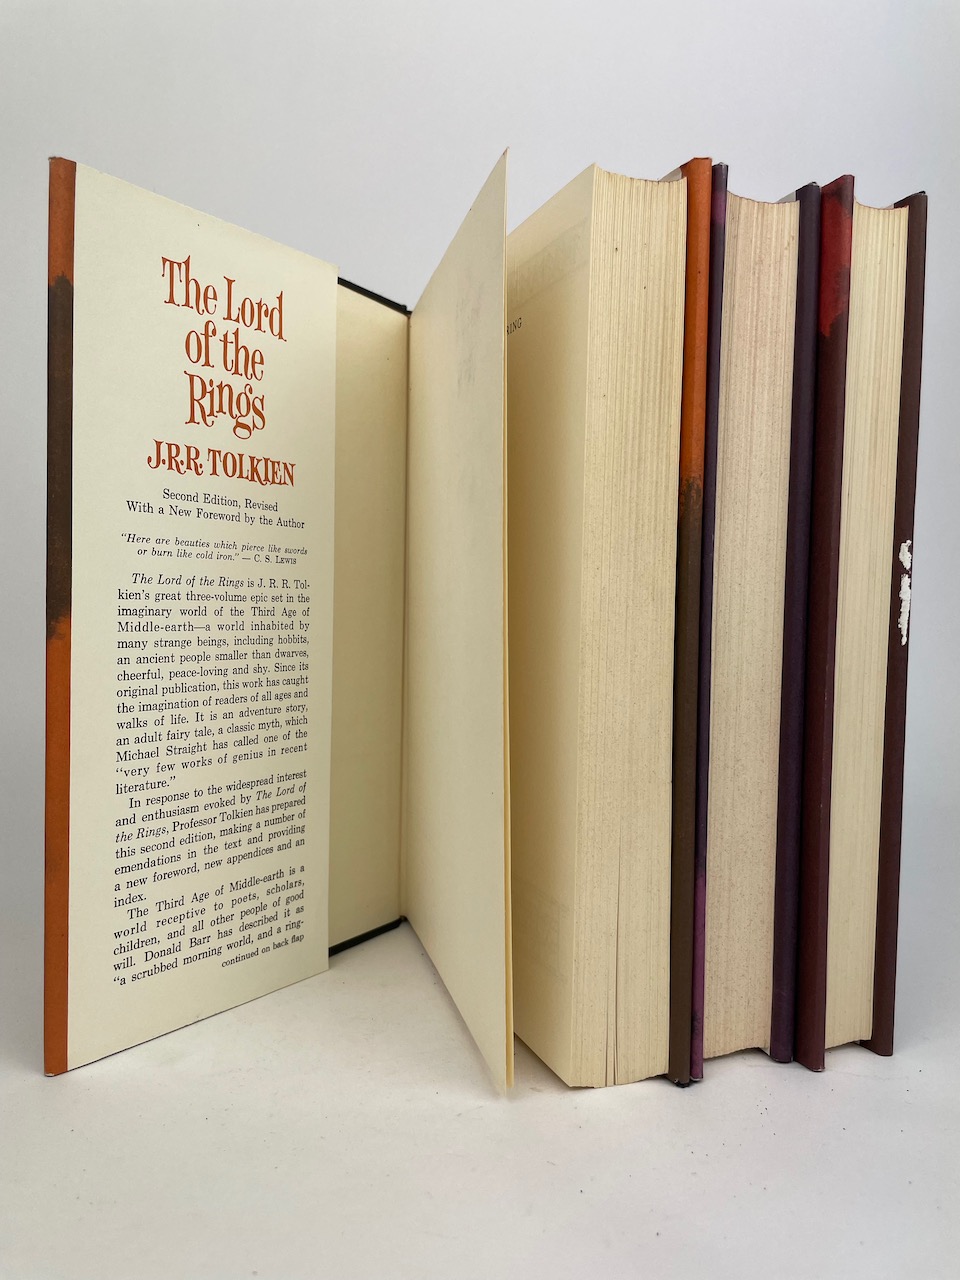 The Lord of the Rings, 2nd US Edition in Original Publishers Slipcase 9th/8th/8th 10